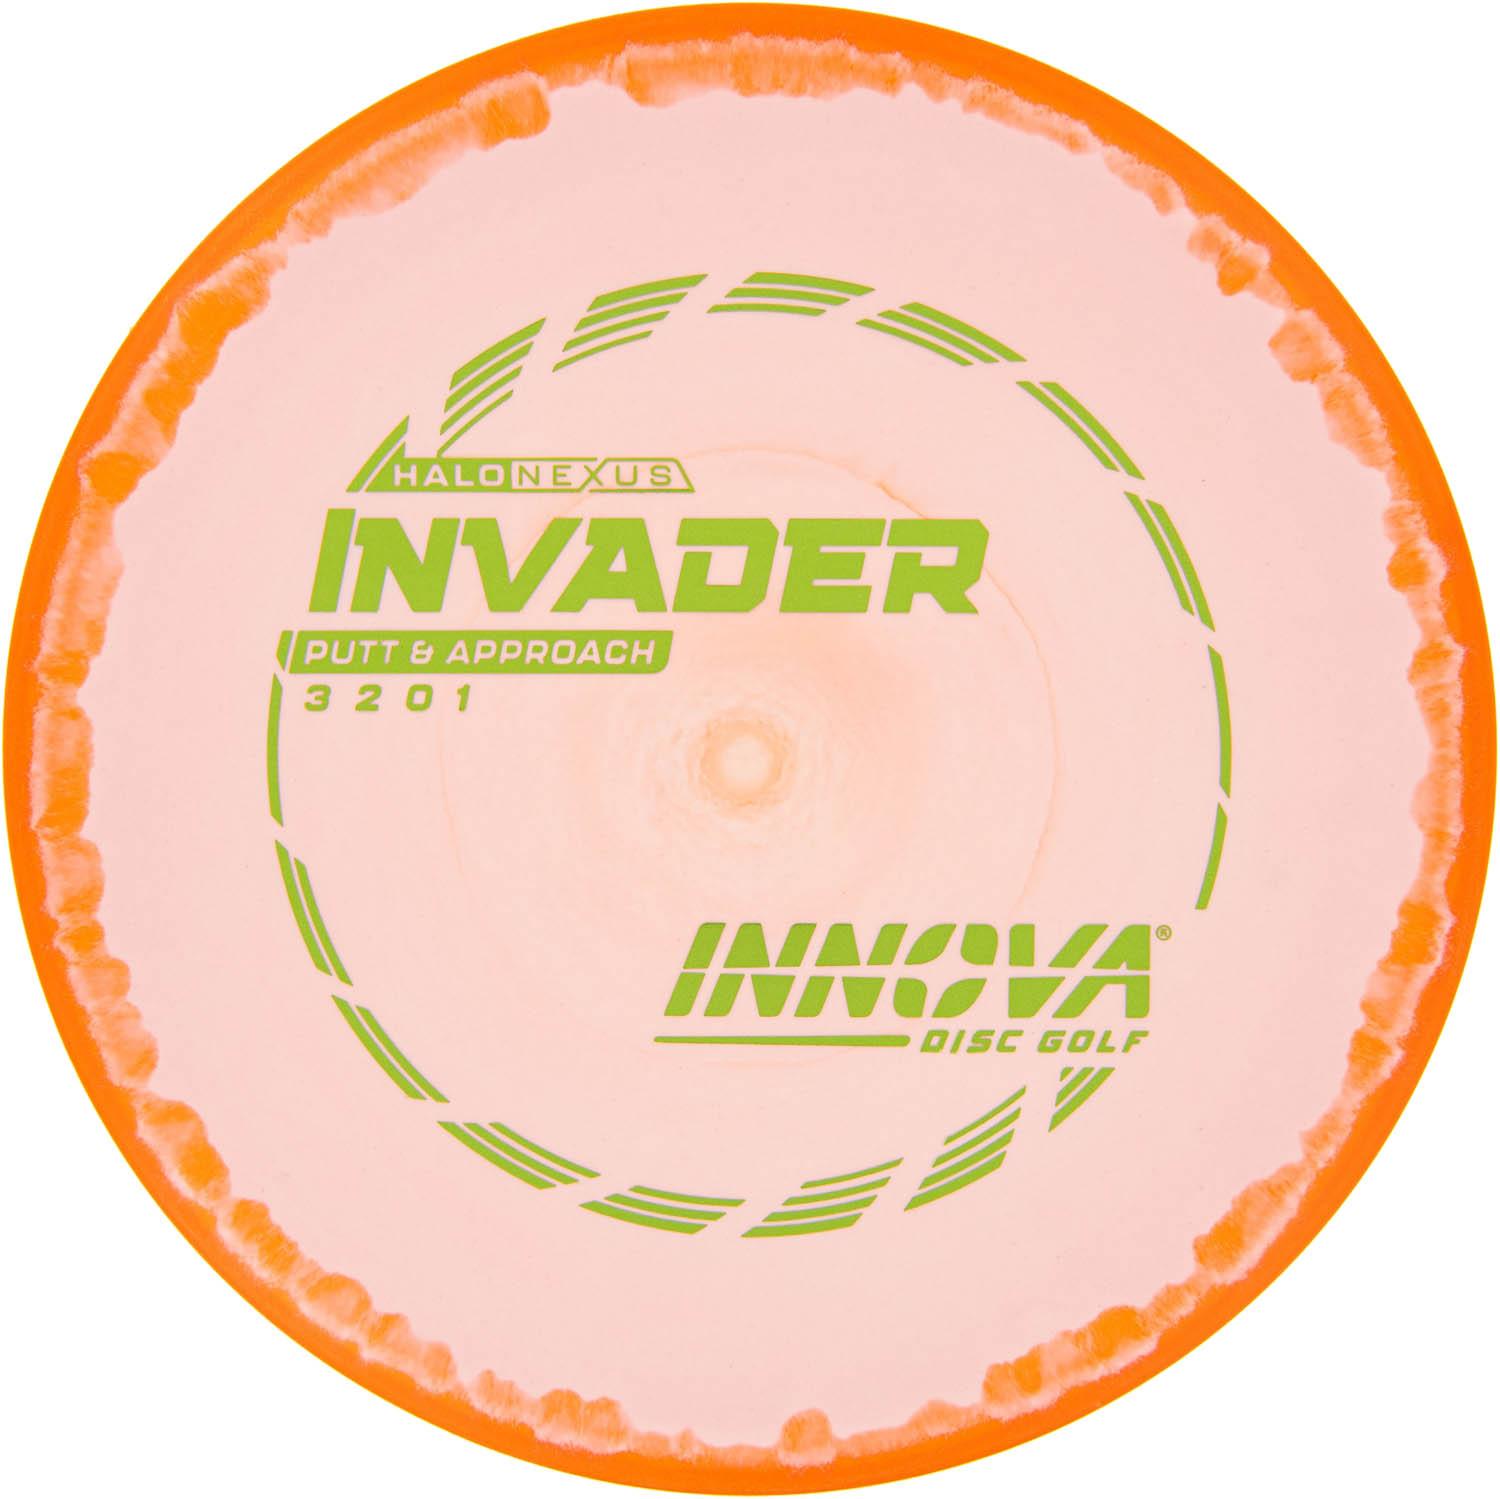 Halo Nexus Invader from Disc Golf United